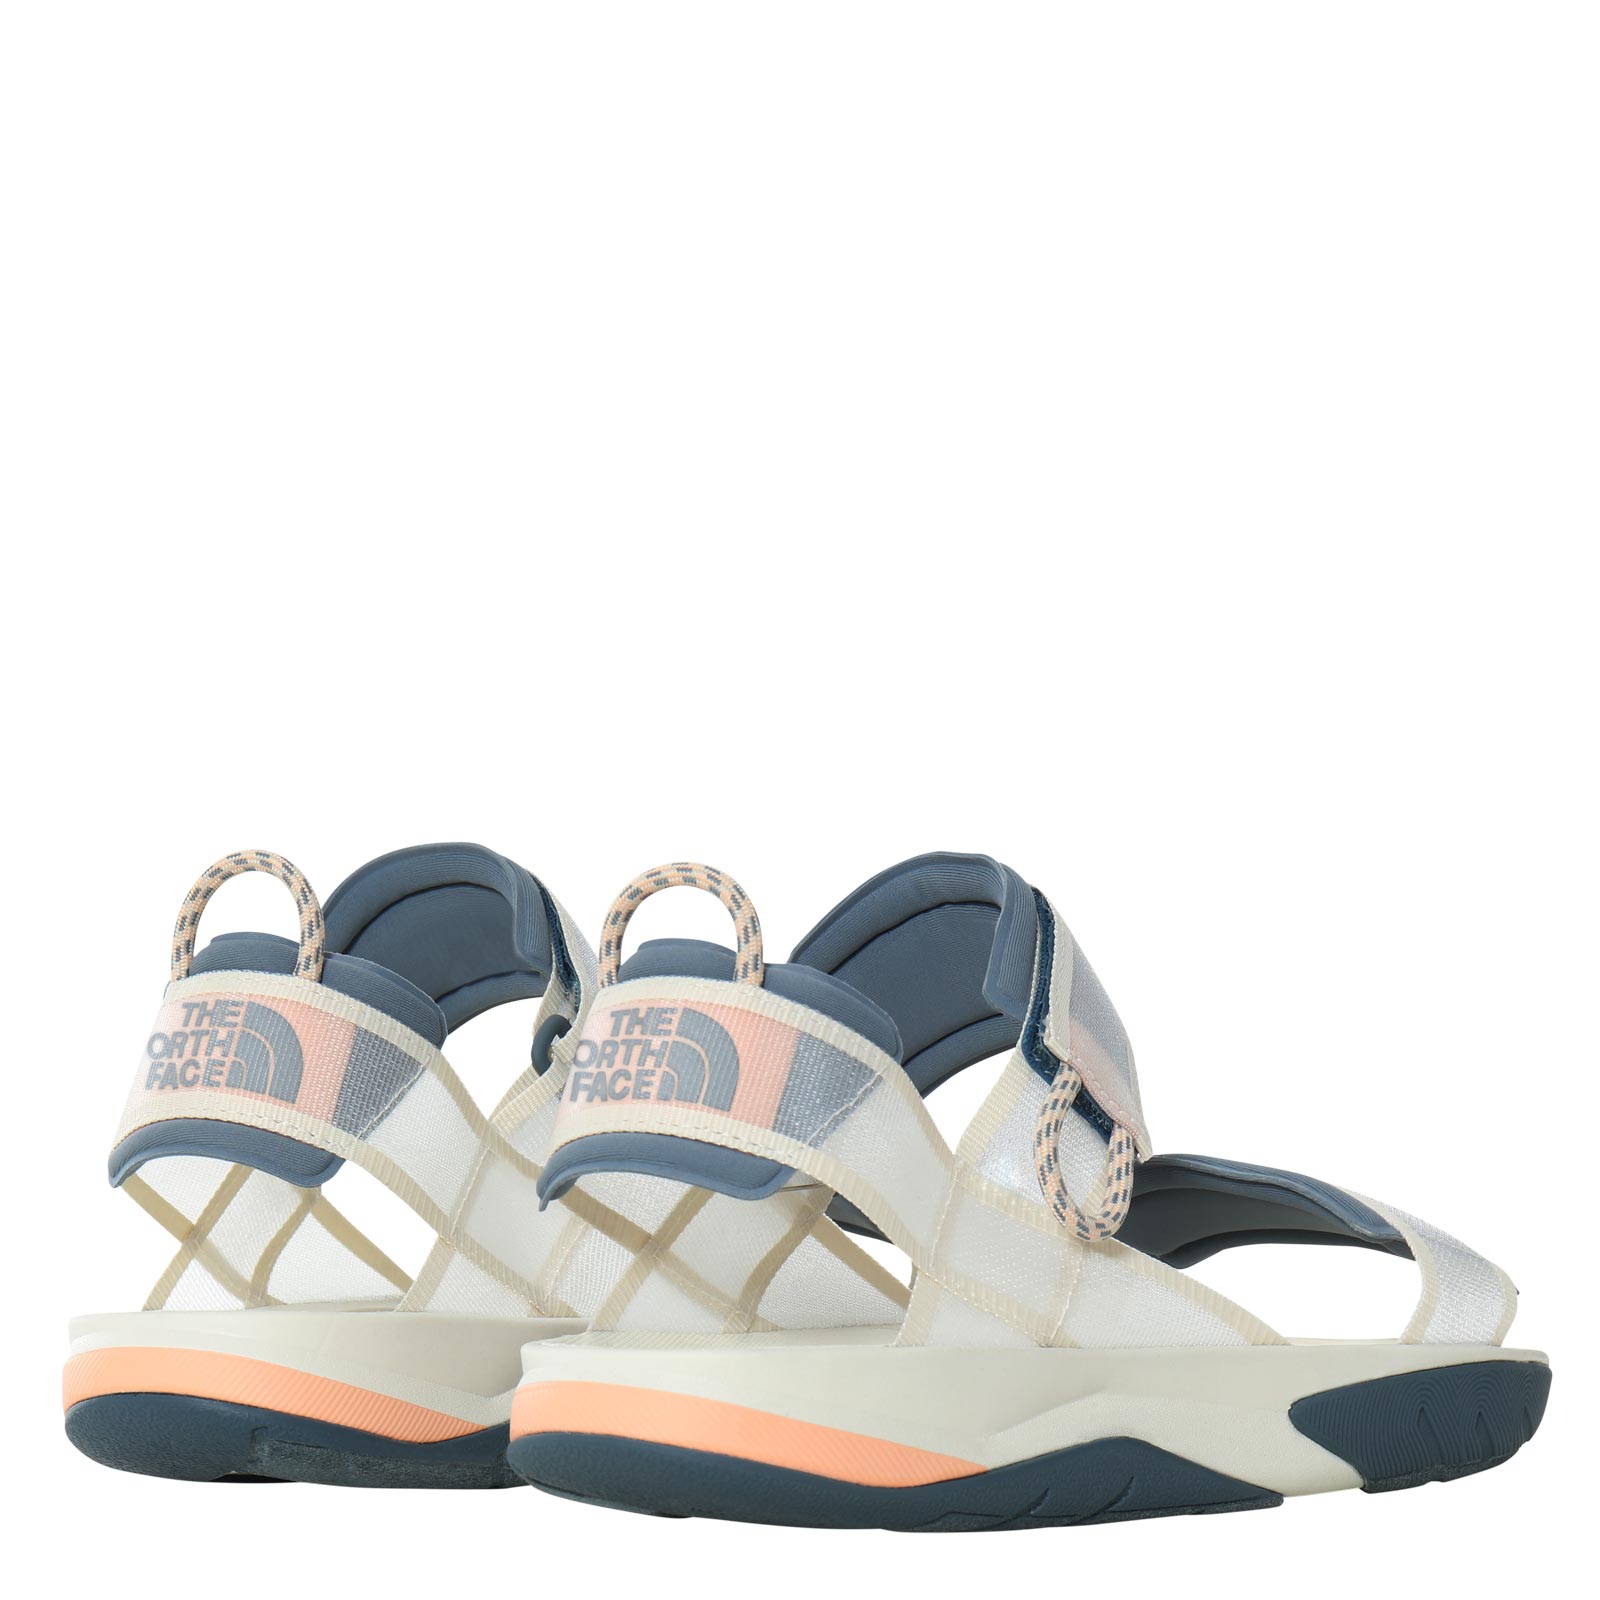 THE NORTH FACE SKEENA WOMENS SPORT SANDALS